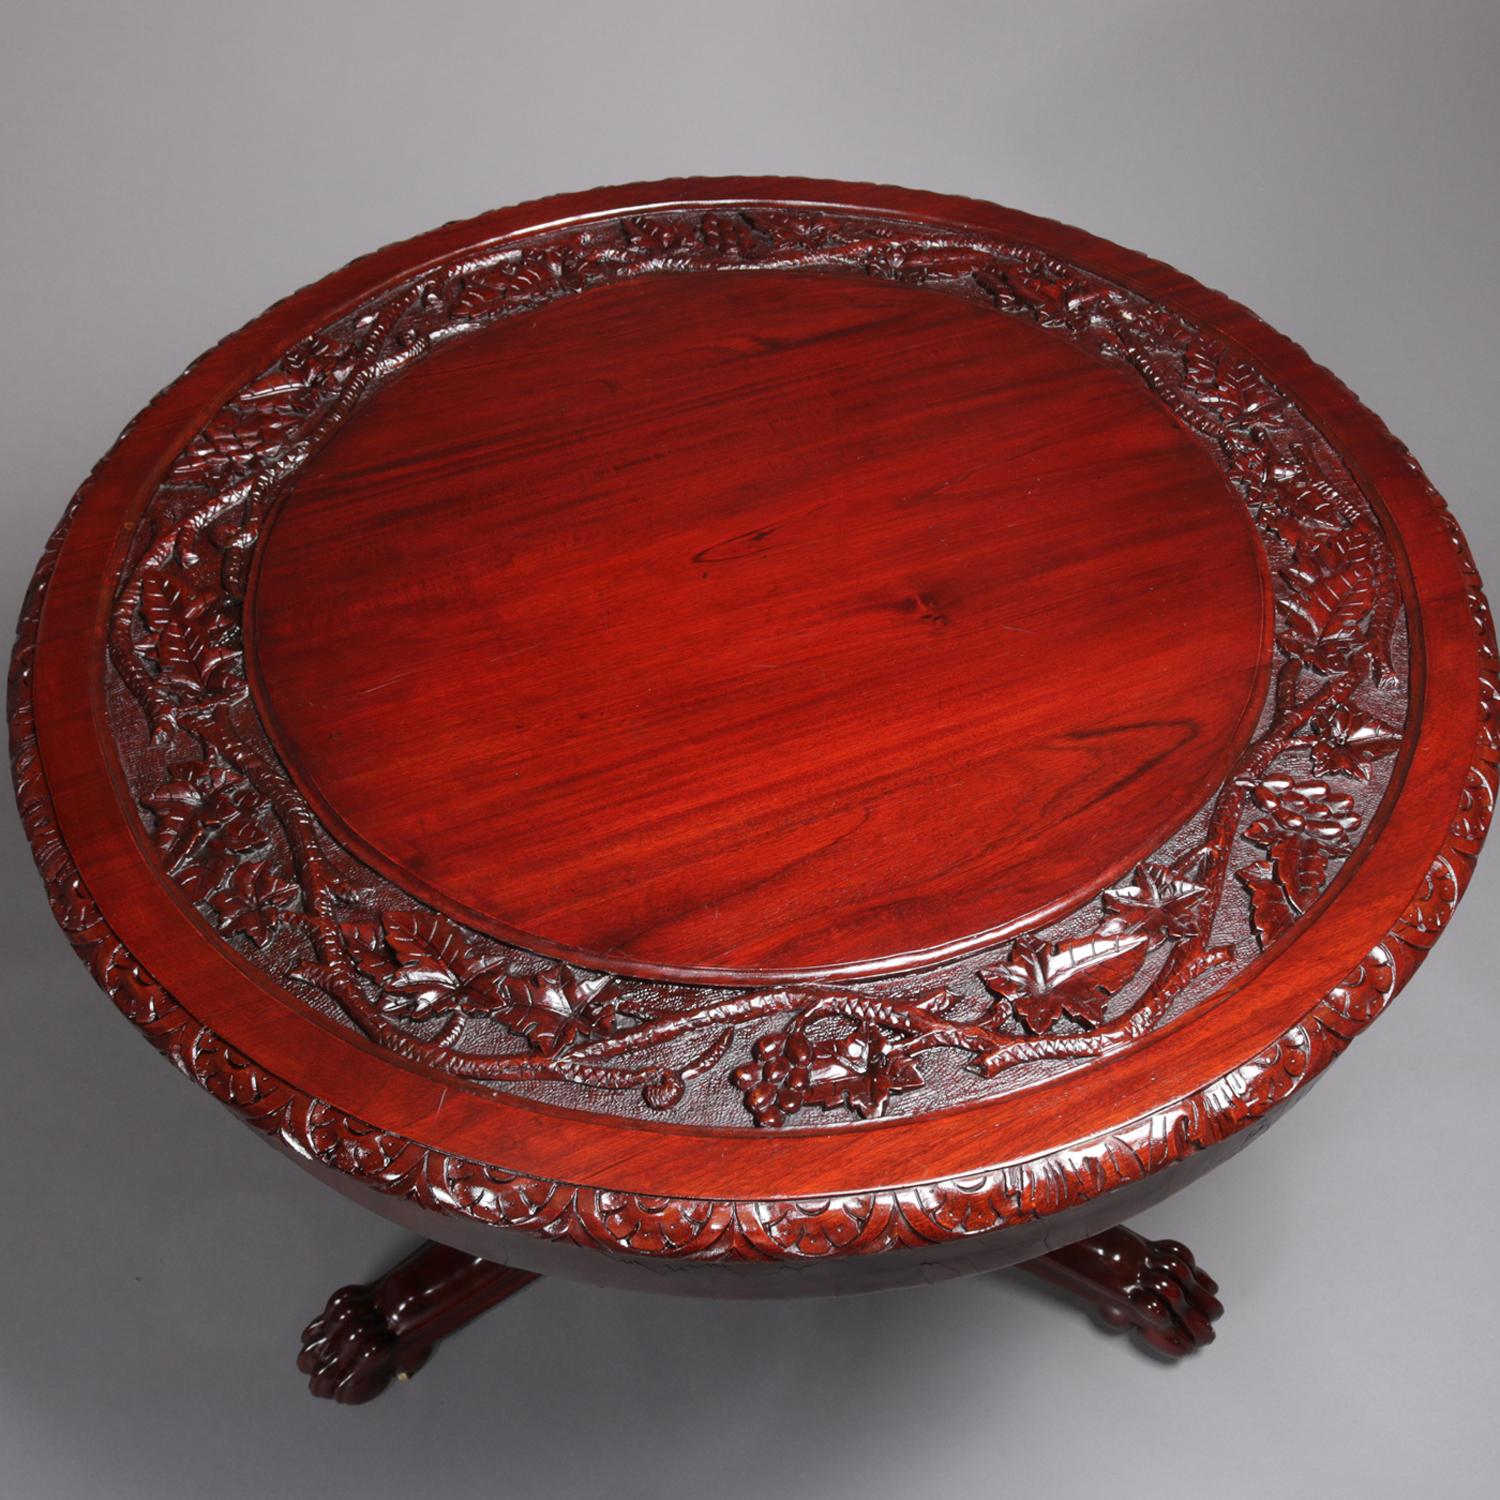 American Empire style classical carved mahogany center table features top with deeply carved grape and leaf wide interior bordering and foliate carved edge over broad skirt, raised on urn form pedestal and supported by three scroll form legs with